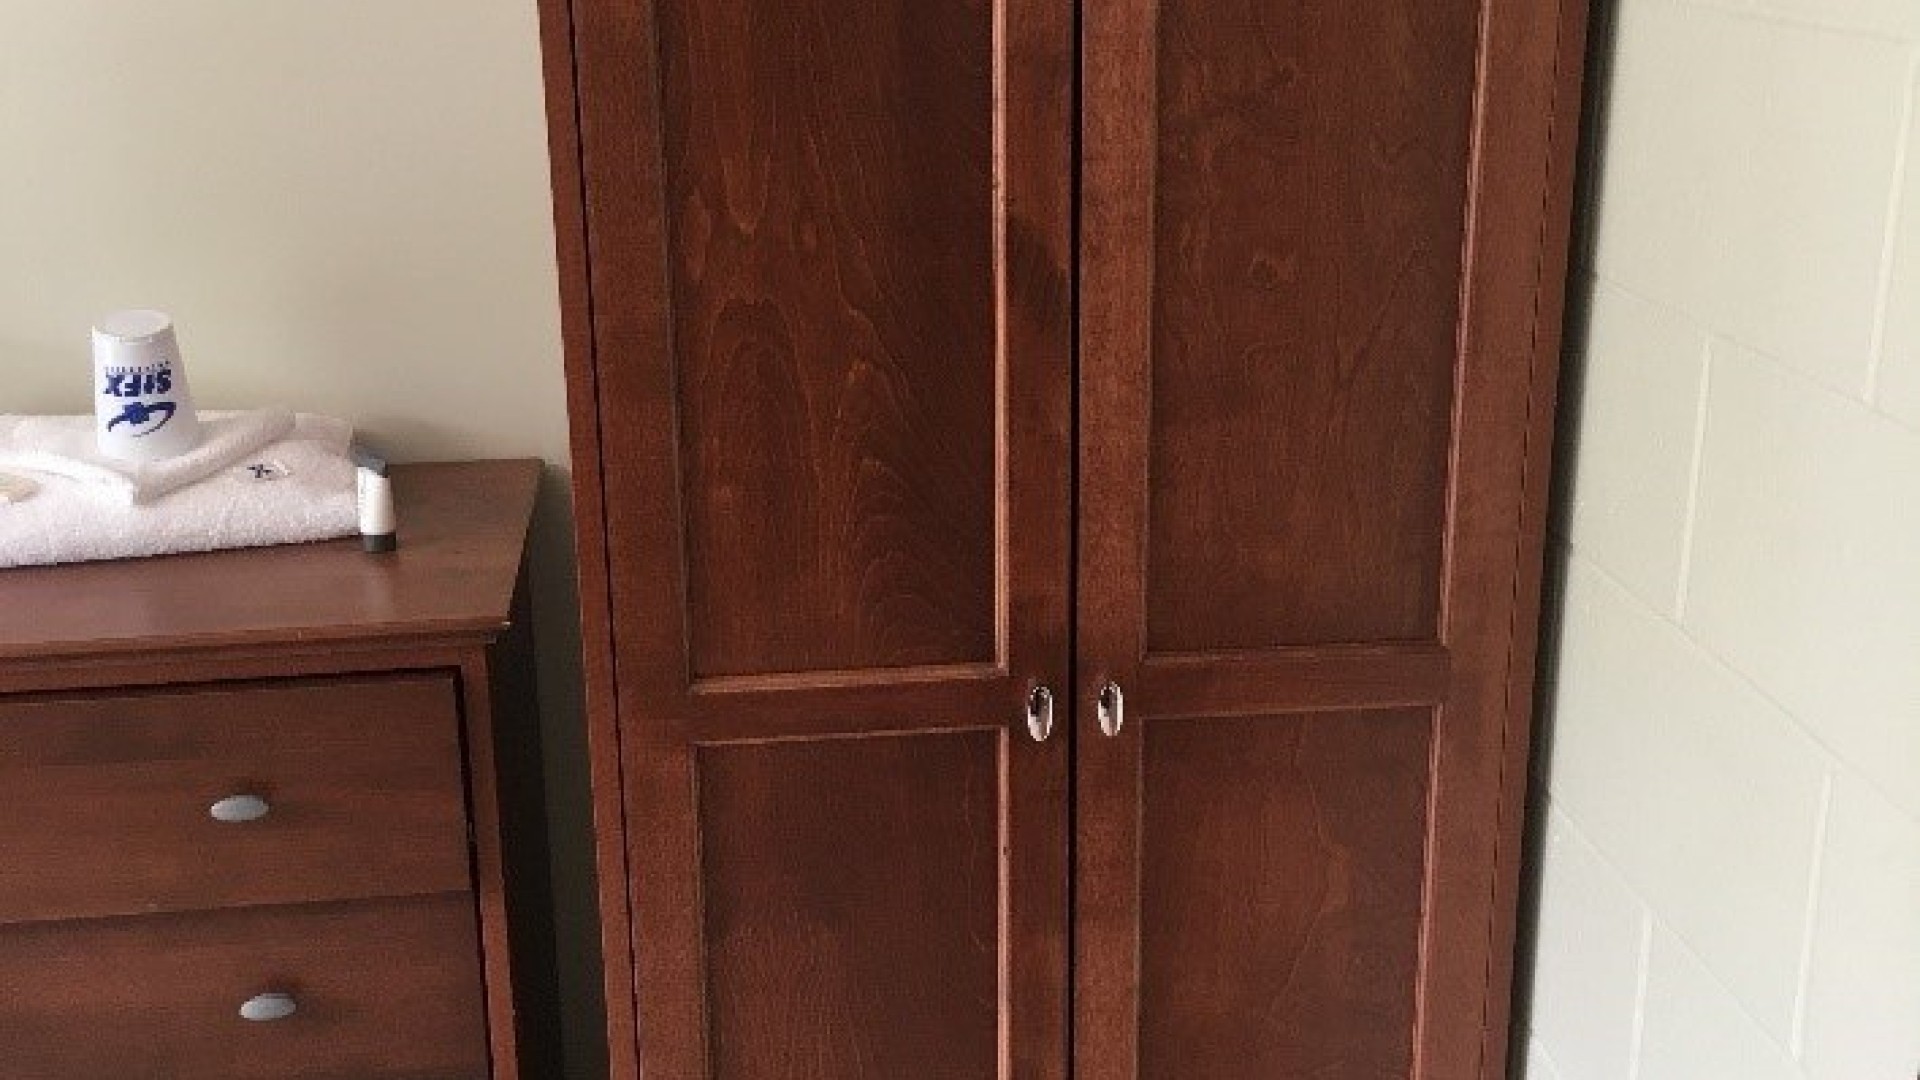 Armoire located in a room for storage 